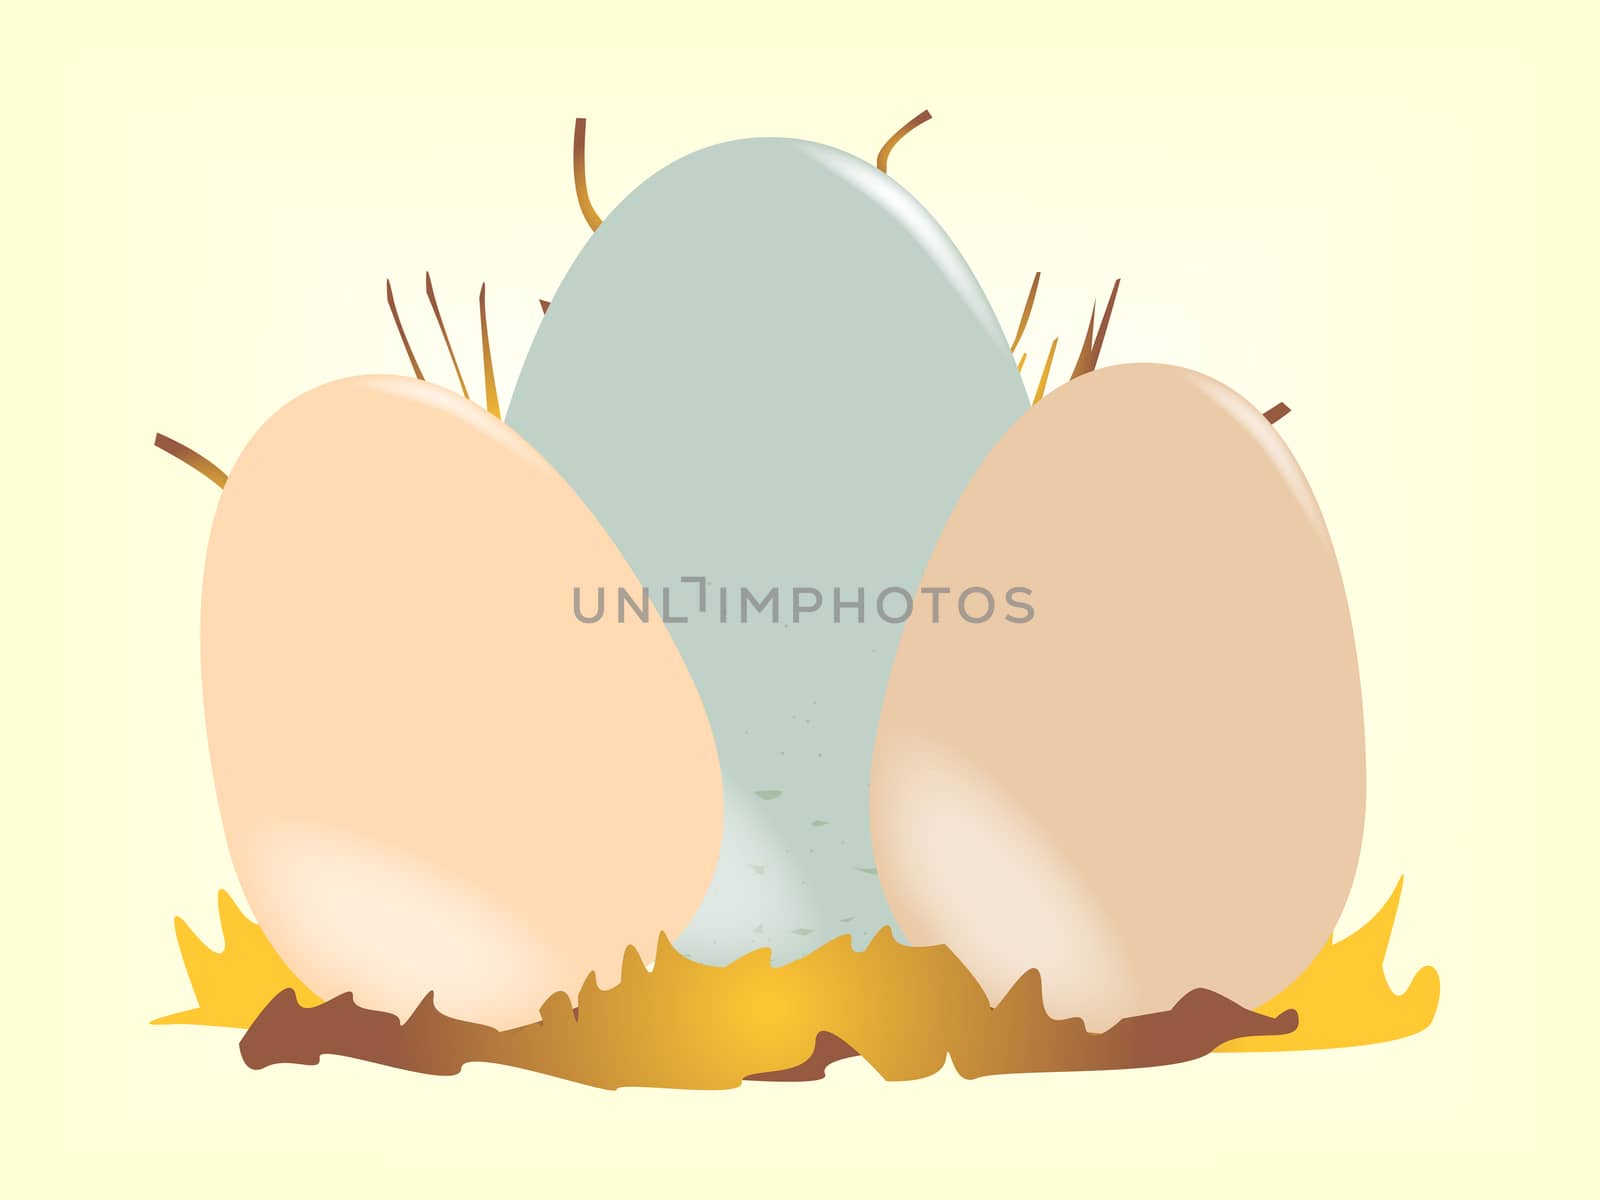 Two chicken eggs nestled together in a nest with a cuckoo egg.